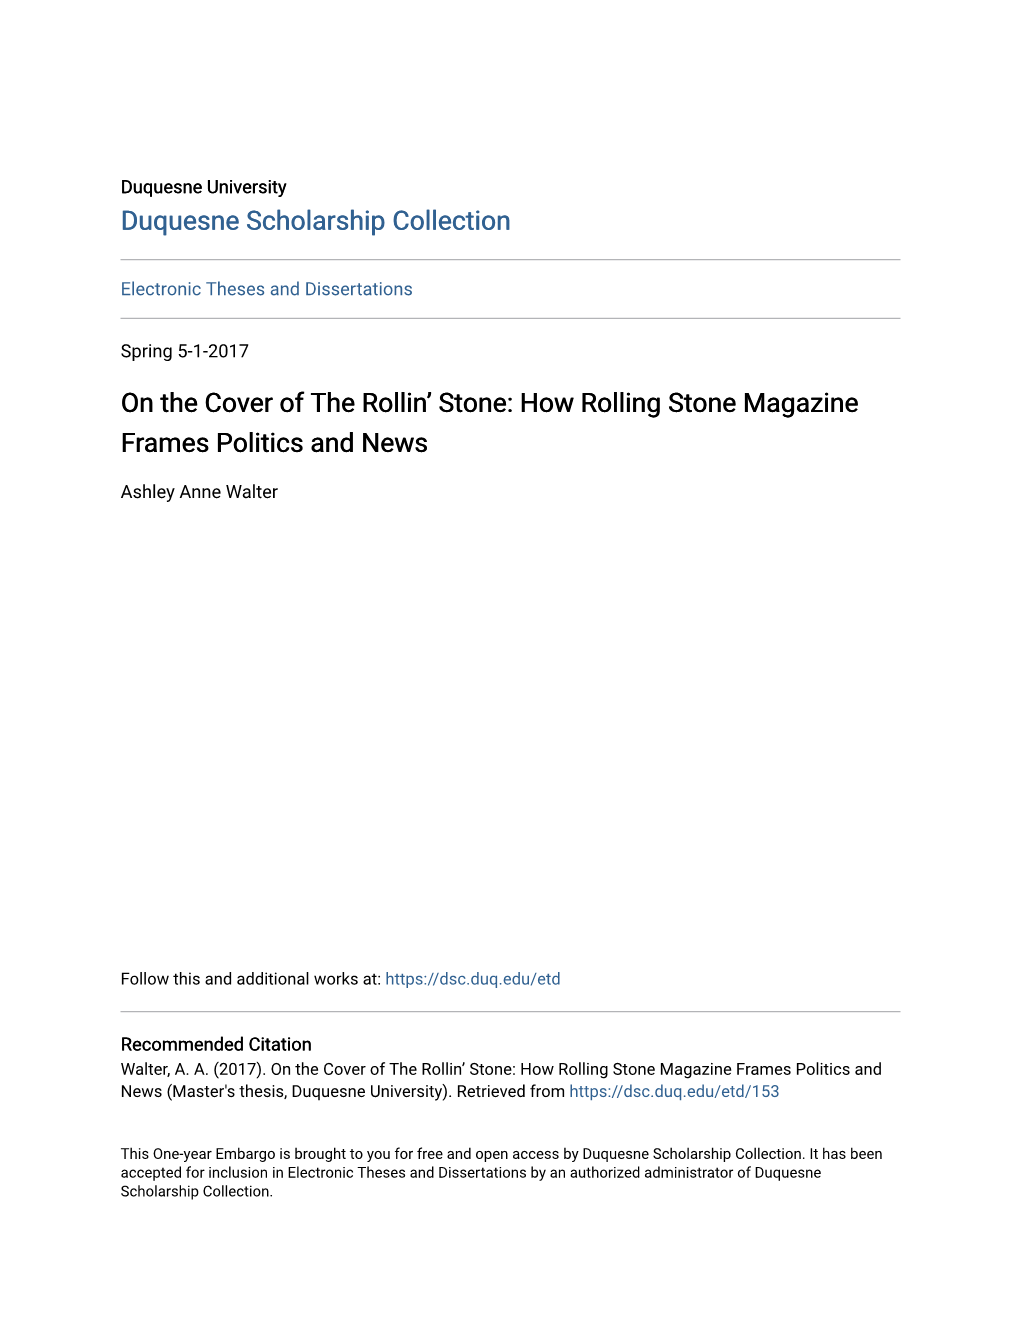 On the Cover of the Rollin' Stone: How Rolling Stone Magazine Frames Politics and News